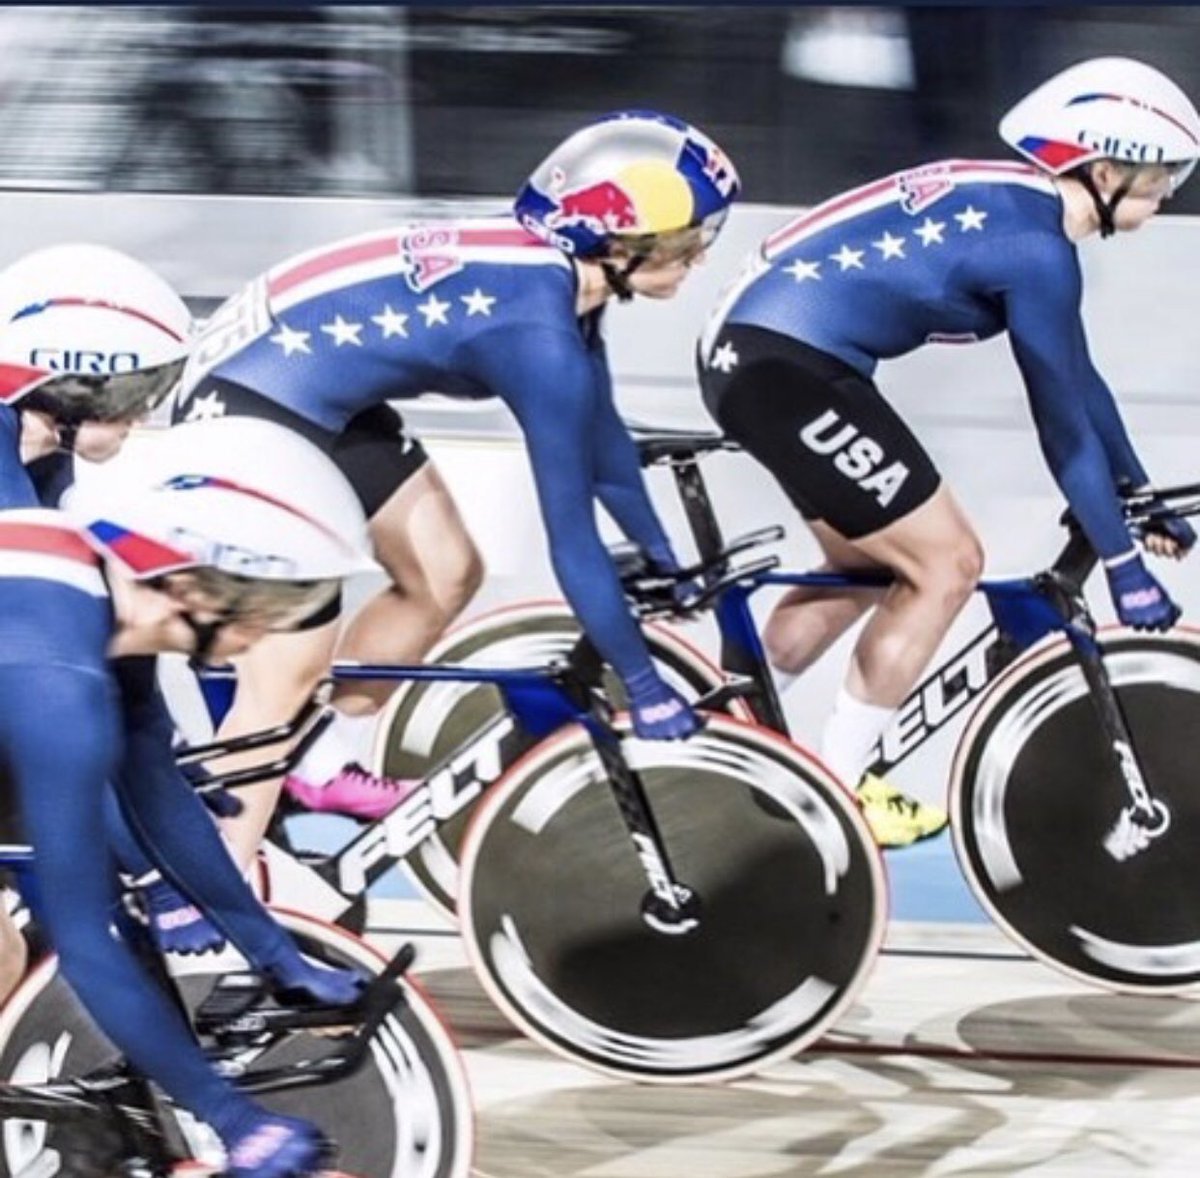 🇺🇸 We are so proud that we got our start by partnering with the Women’s @usacycling team ahead of Rio 2016. We worked closely with them to ensure our tech empowered them w/ the critical data needed to achieve optimal performance 🏅 What an impact #wearabletech has! 👓